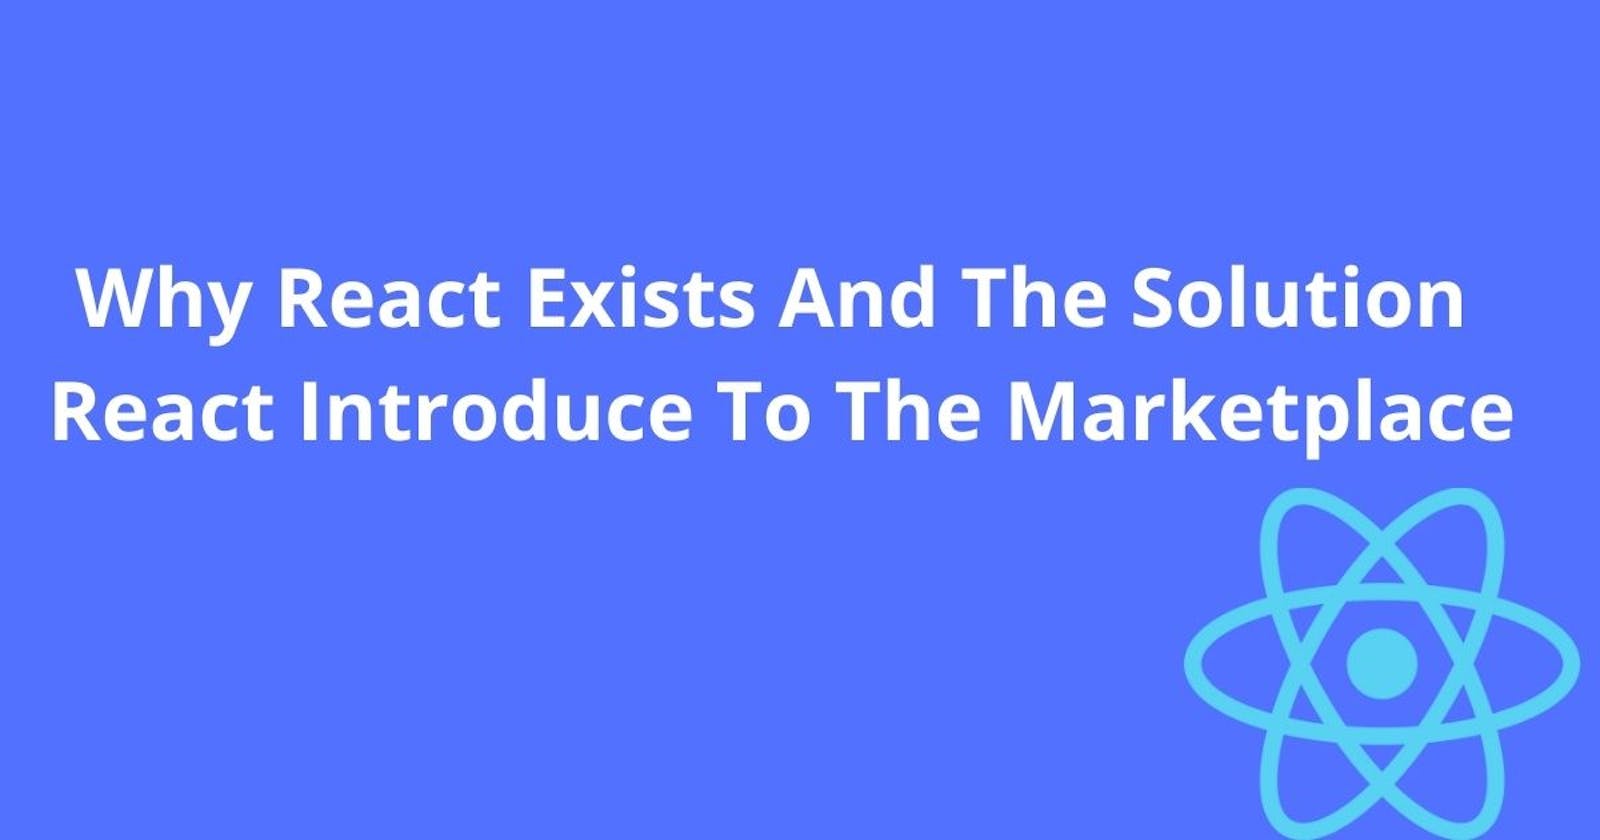 Why React Exists and the solution React Introduce To The Marketplace